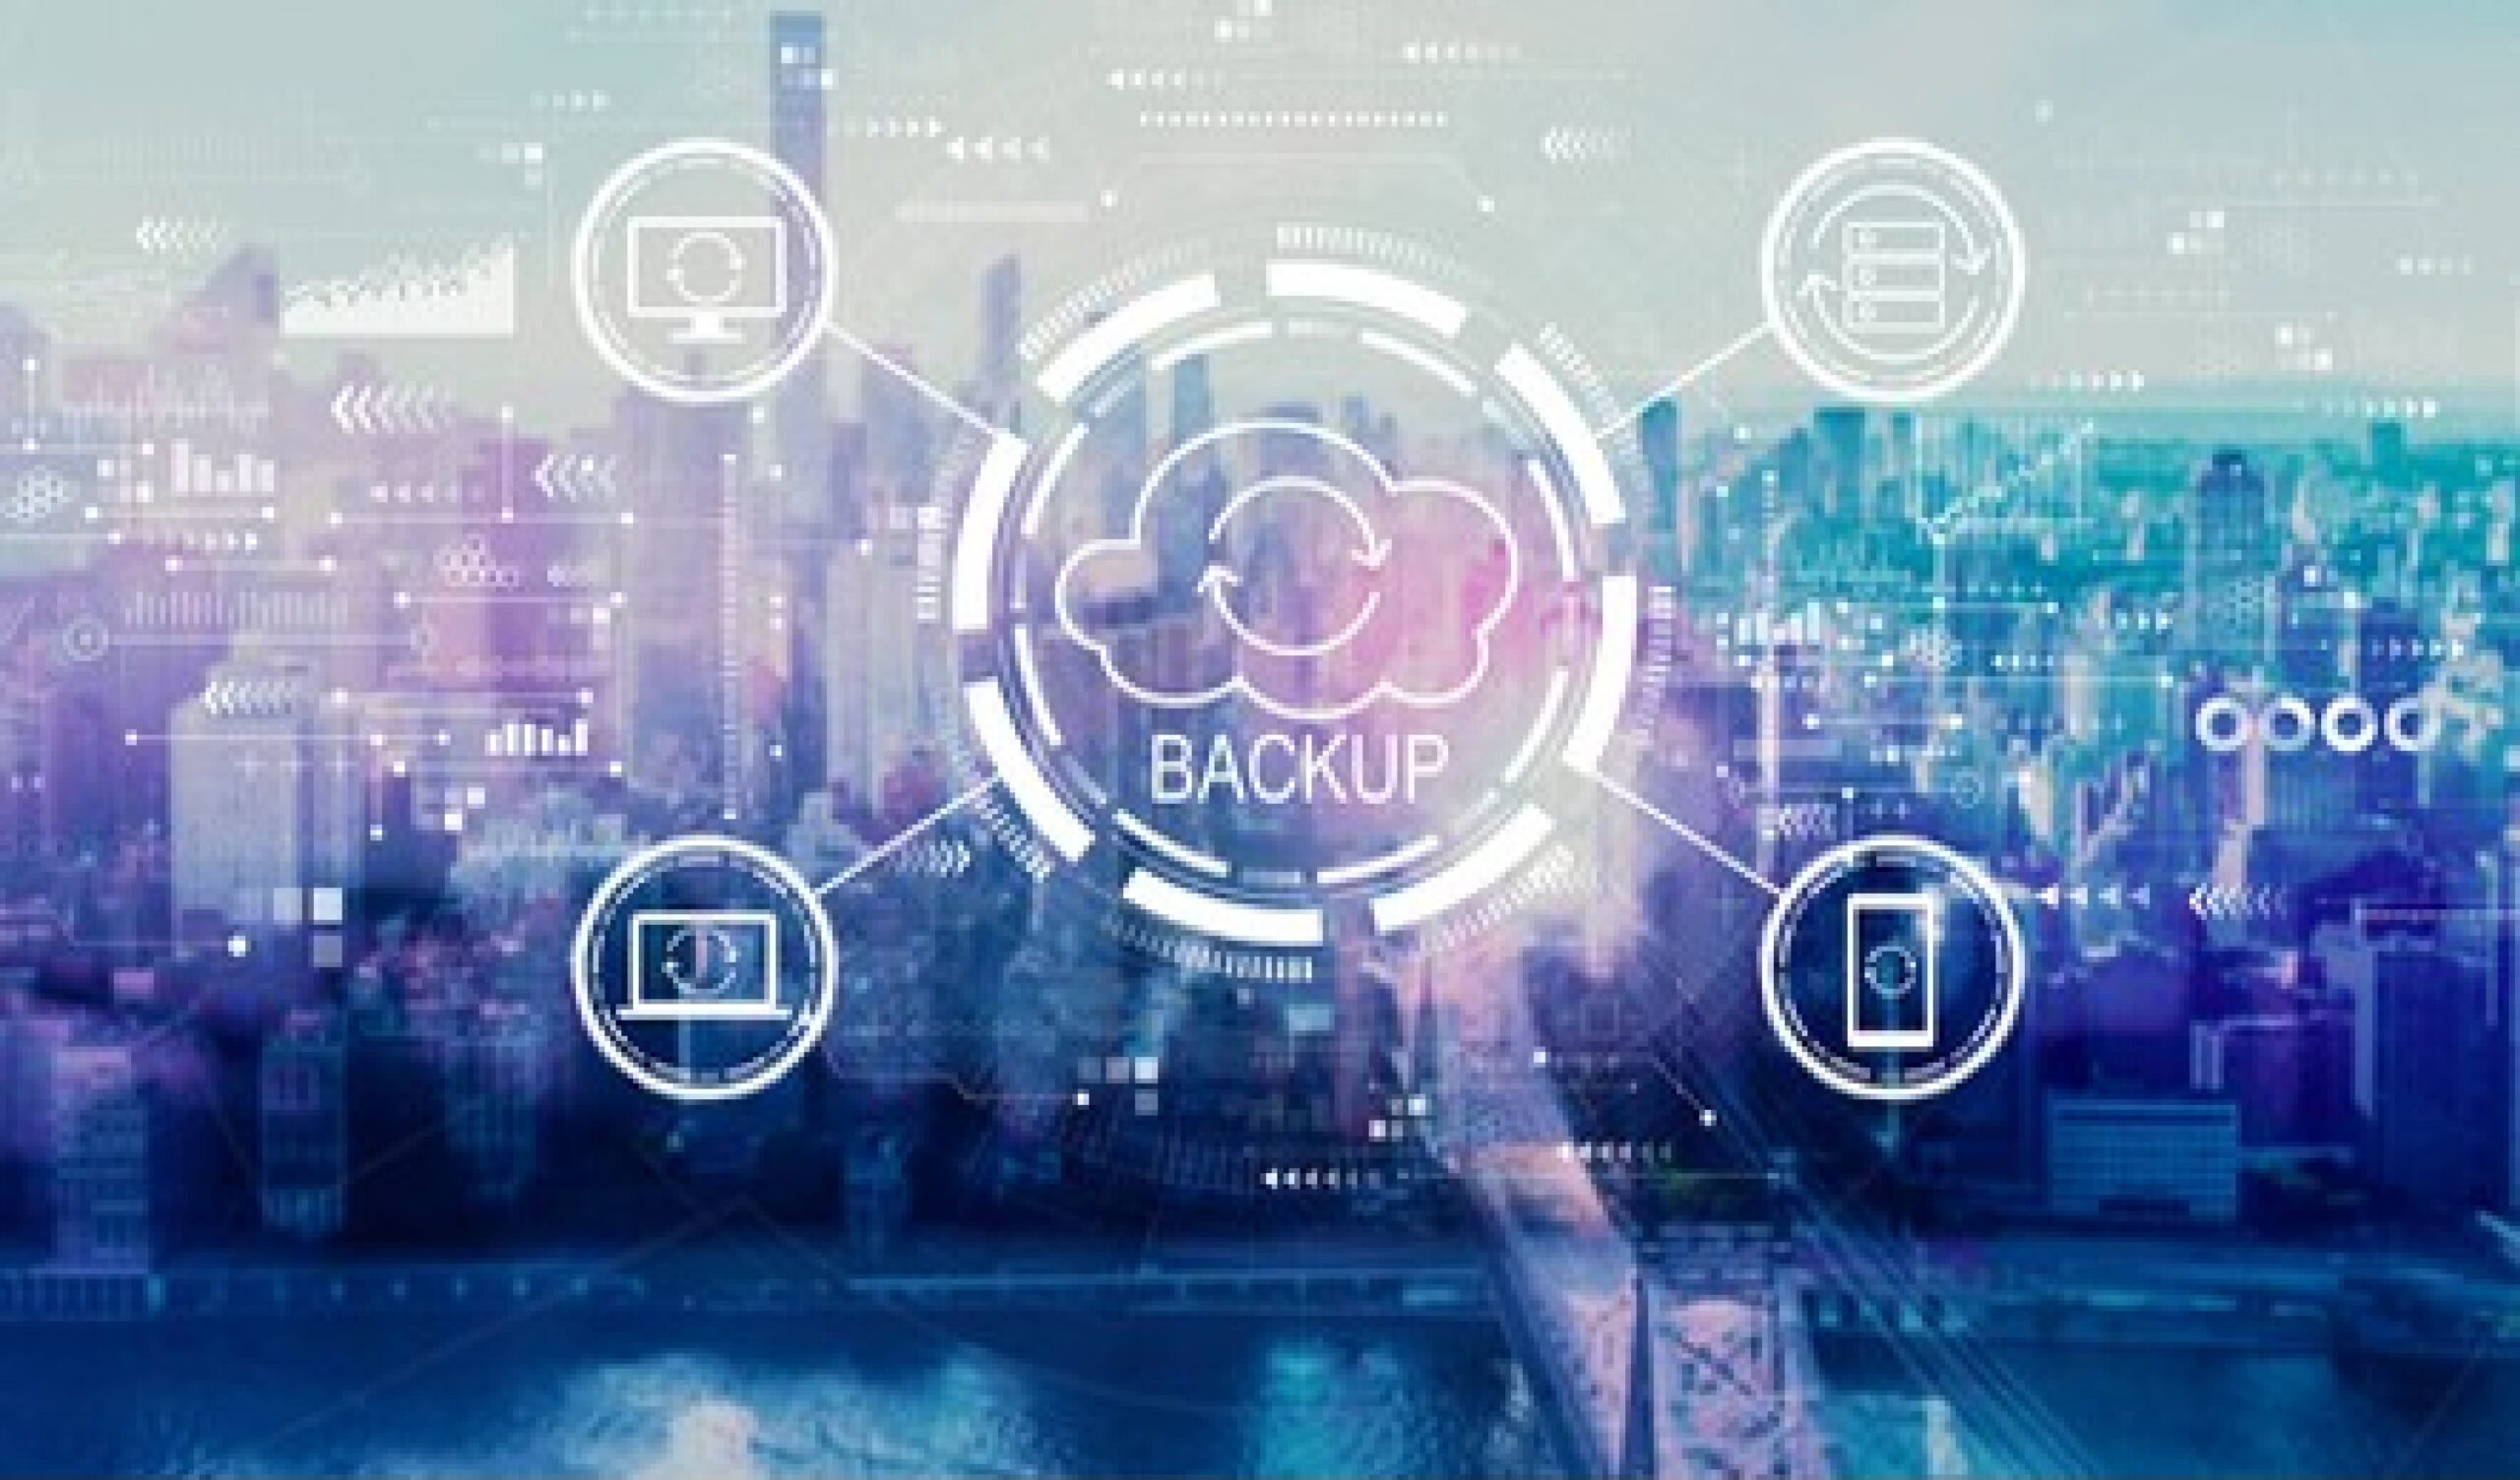 Cloud Backup disaster recovery